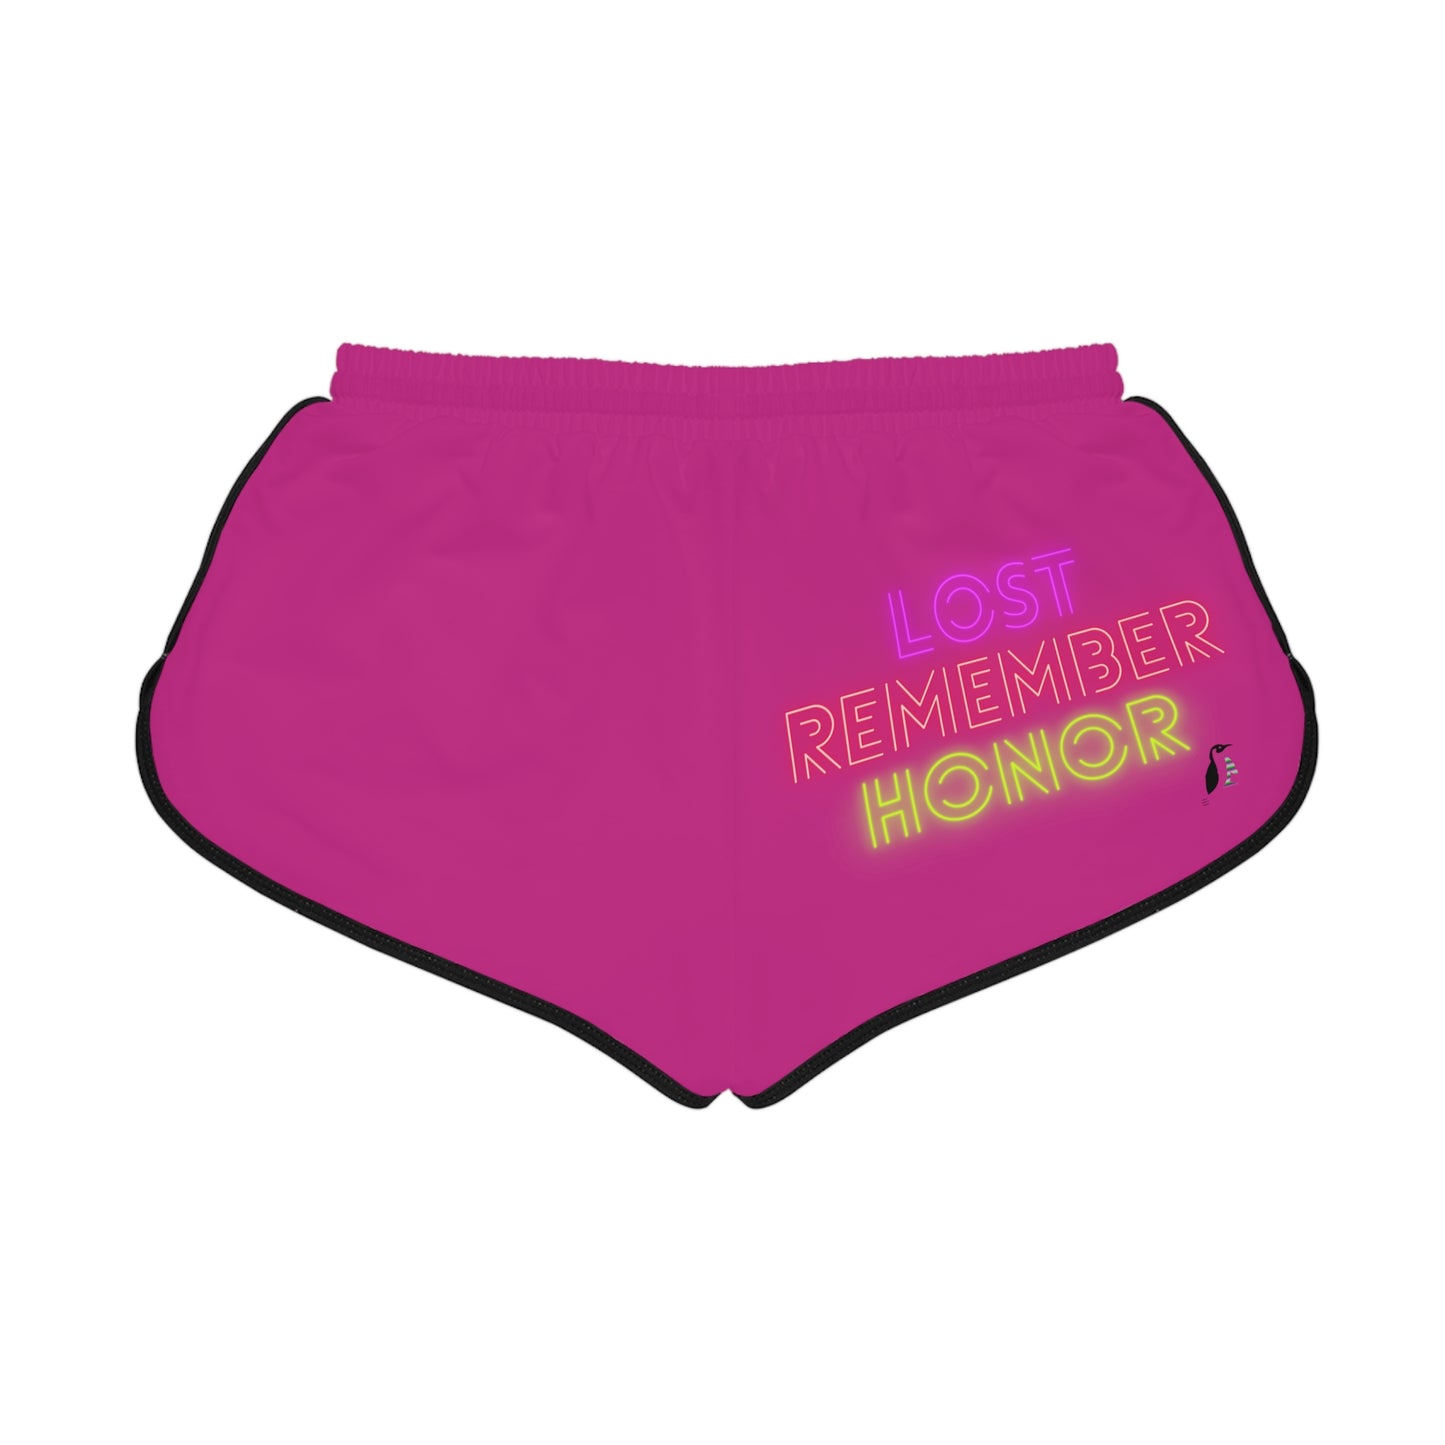 Women's Relaxed Shorts: Dragons Pink